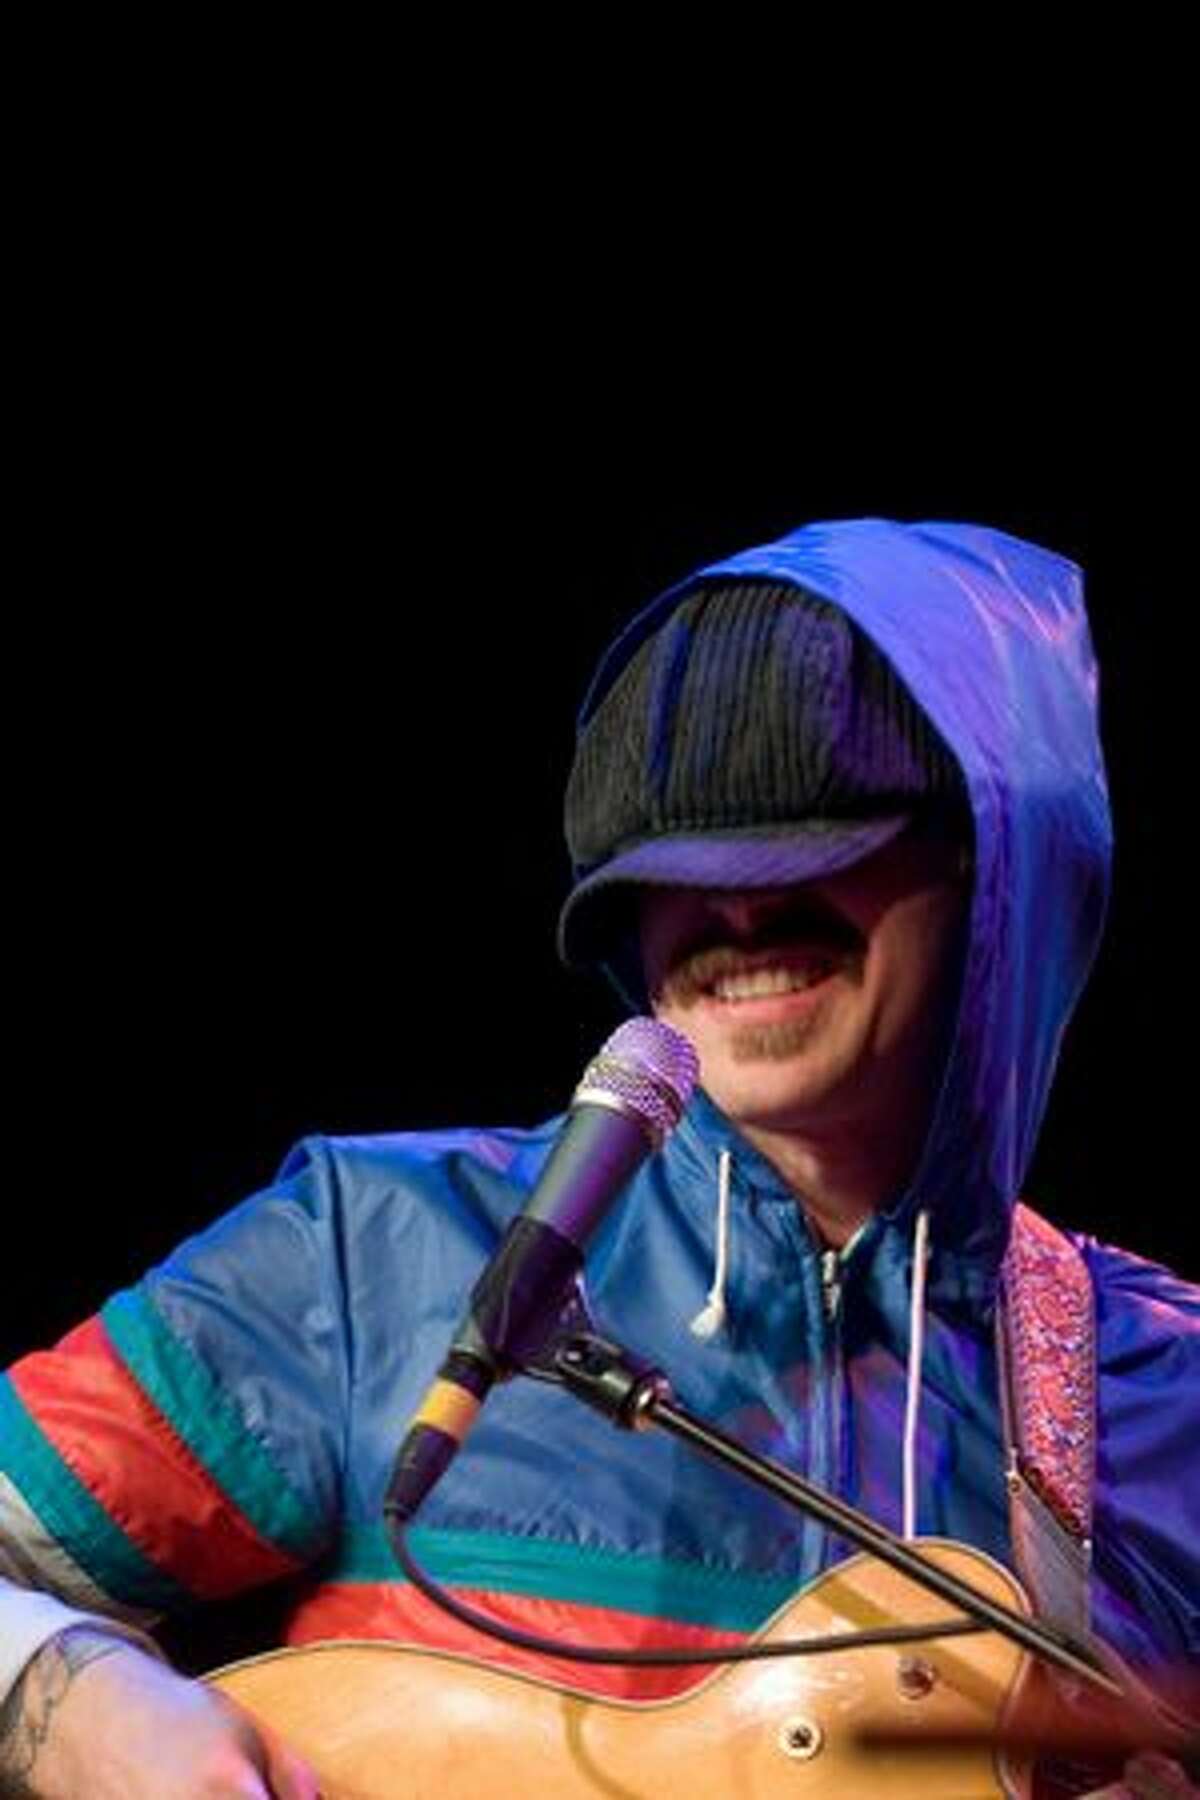 Portugal. The Man plays at Showbox at the Market as part of the Rhapsody Rocks Seattle series on Feb. 16. (Chona Kasinger / seattlepi.com)